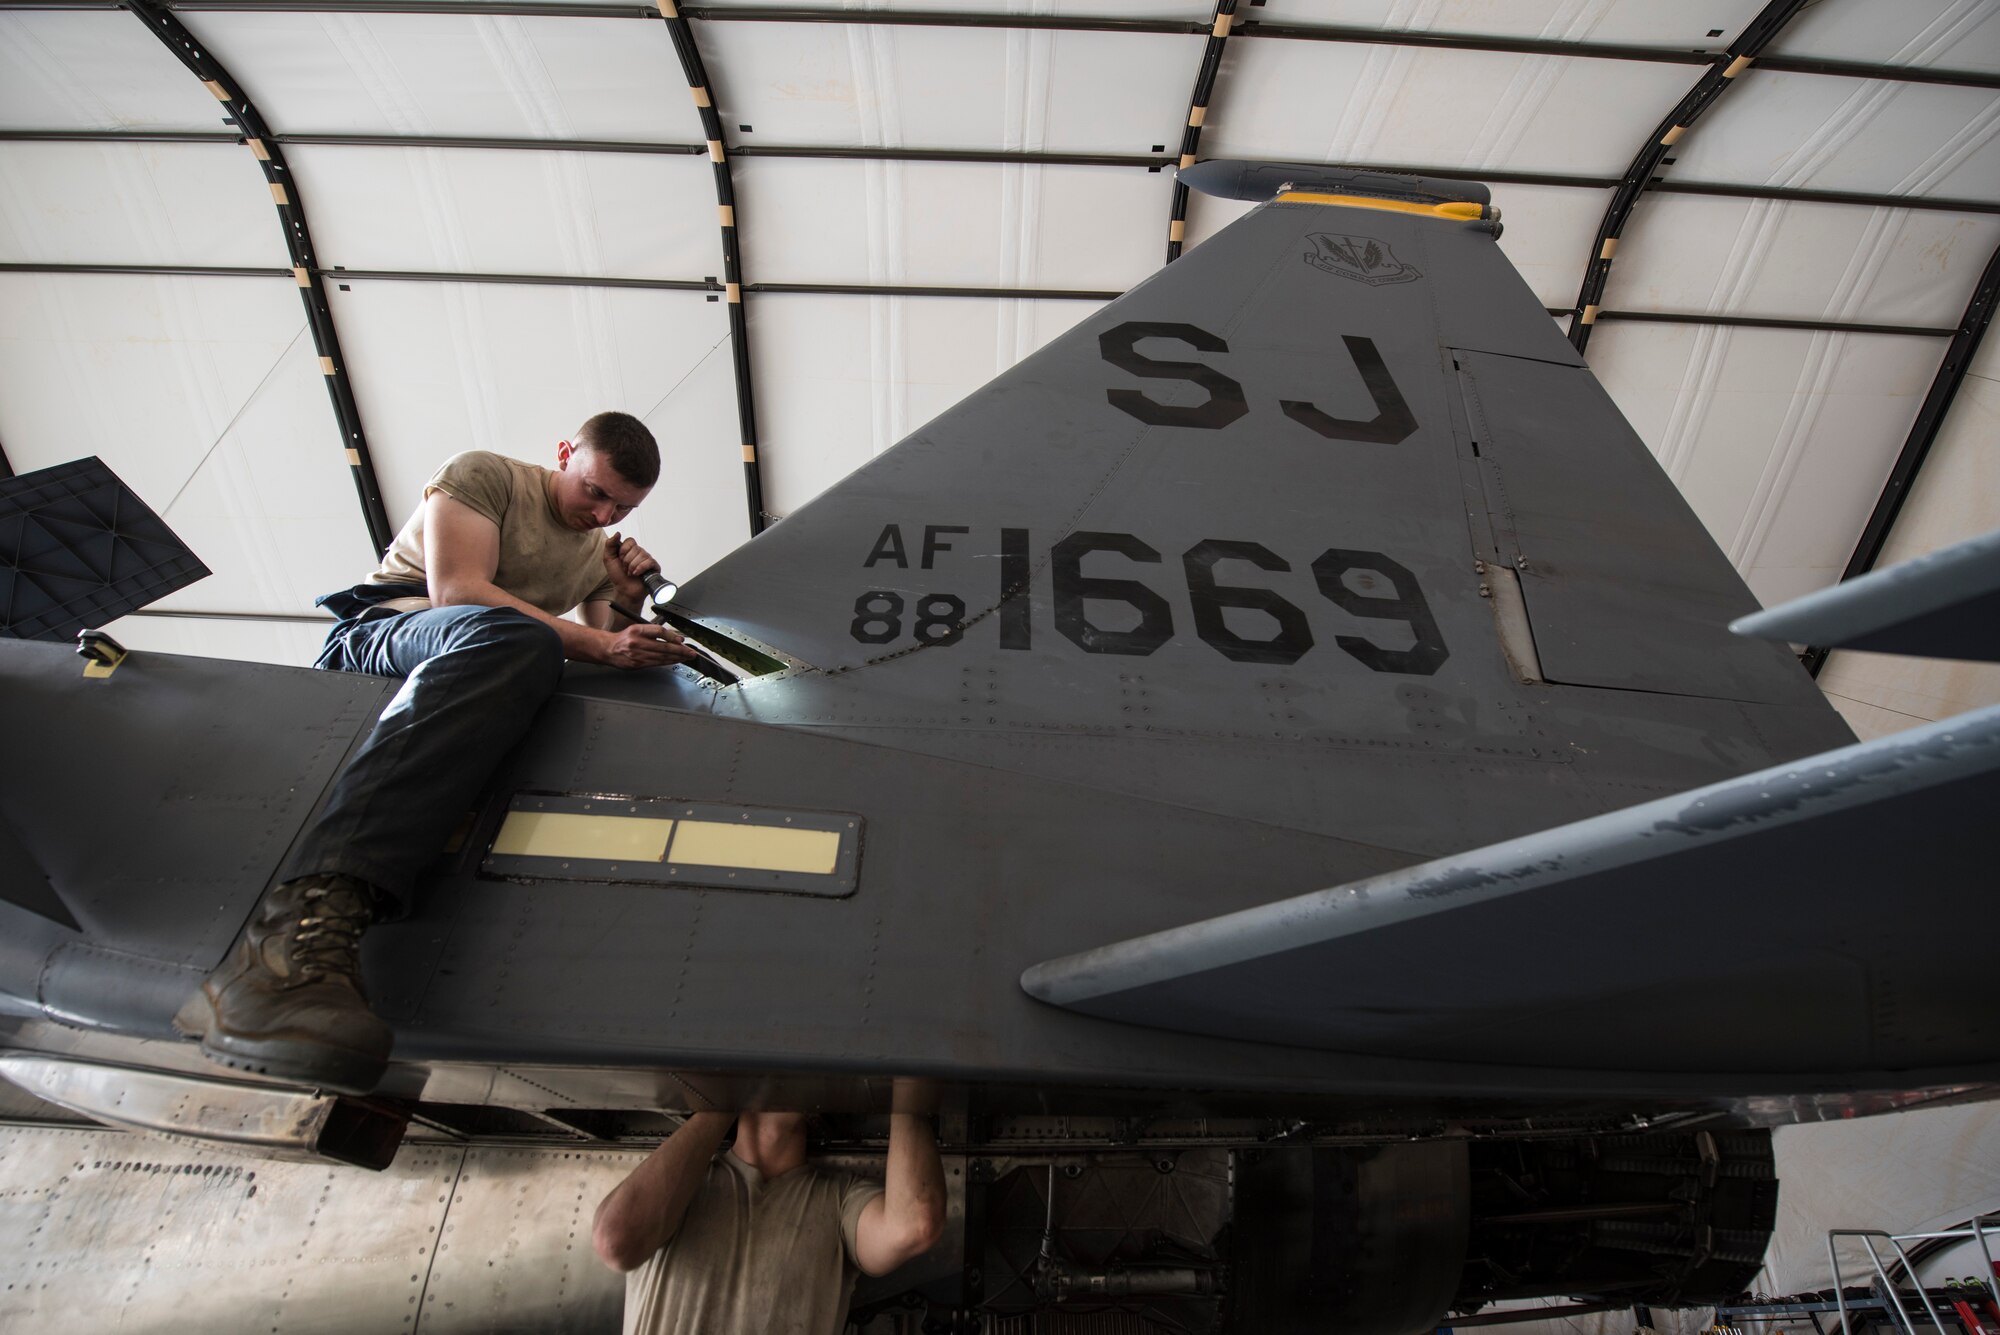 Maintainers assigned to the 332d Expeditionary Maintenance Squadron, inspect components on an F-15E Strike Eagle during phase maintenance March 1, 2018, at an undisclosed location. The 332 EMXS and their Strike Eagles are deployed from Seymour Johnson, Air Force Base, N.C., in support of Operation Inherent Resolve. (U.S. Air Force photo by Staff Sgt. Joshua Kleinholz)